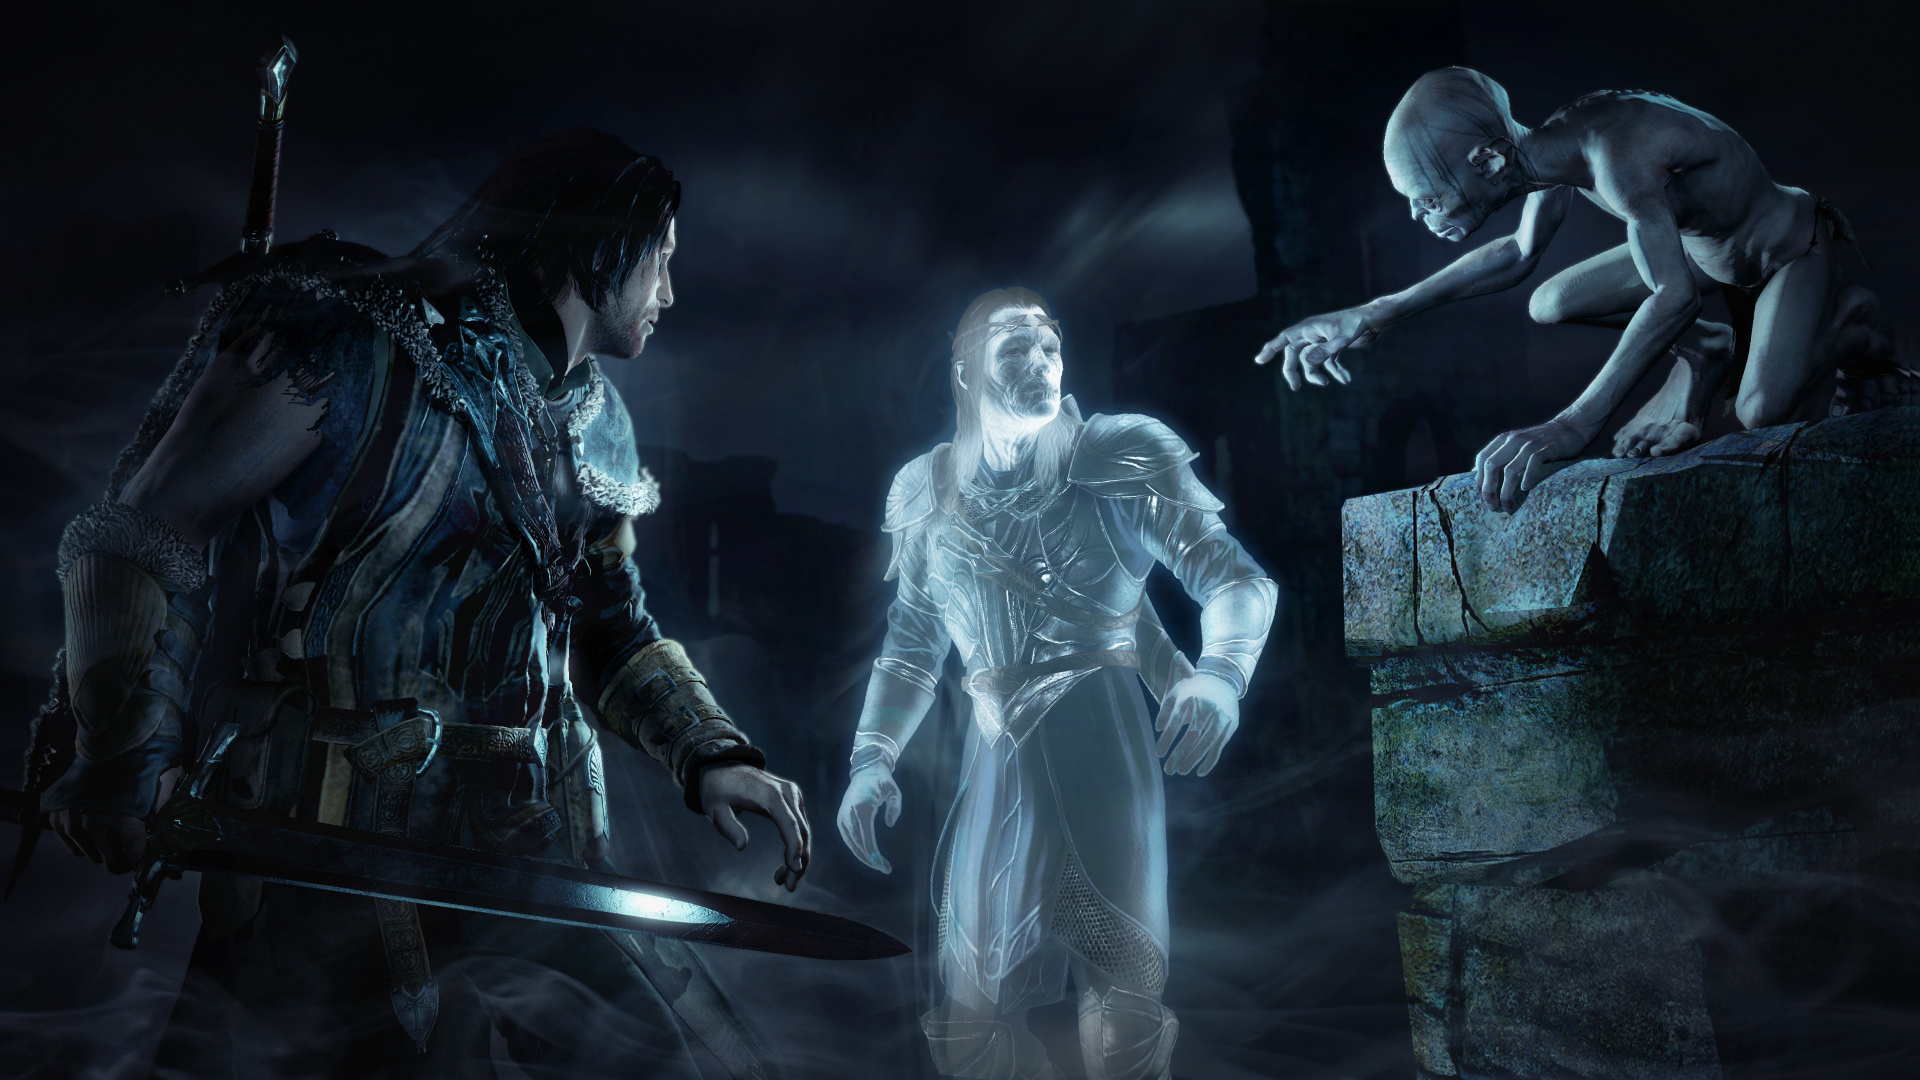 shadow of mordor ps4 multiplayer